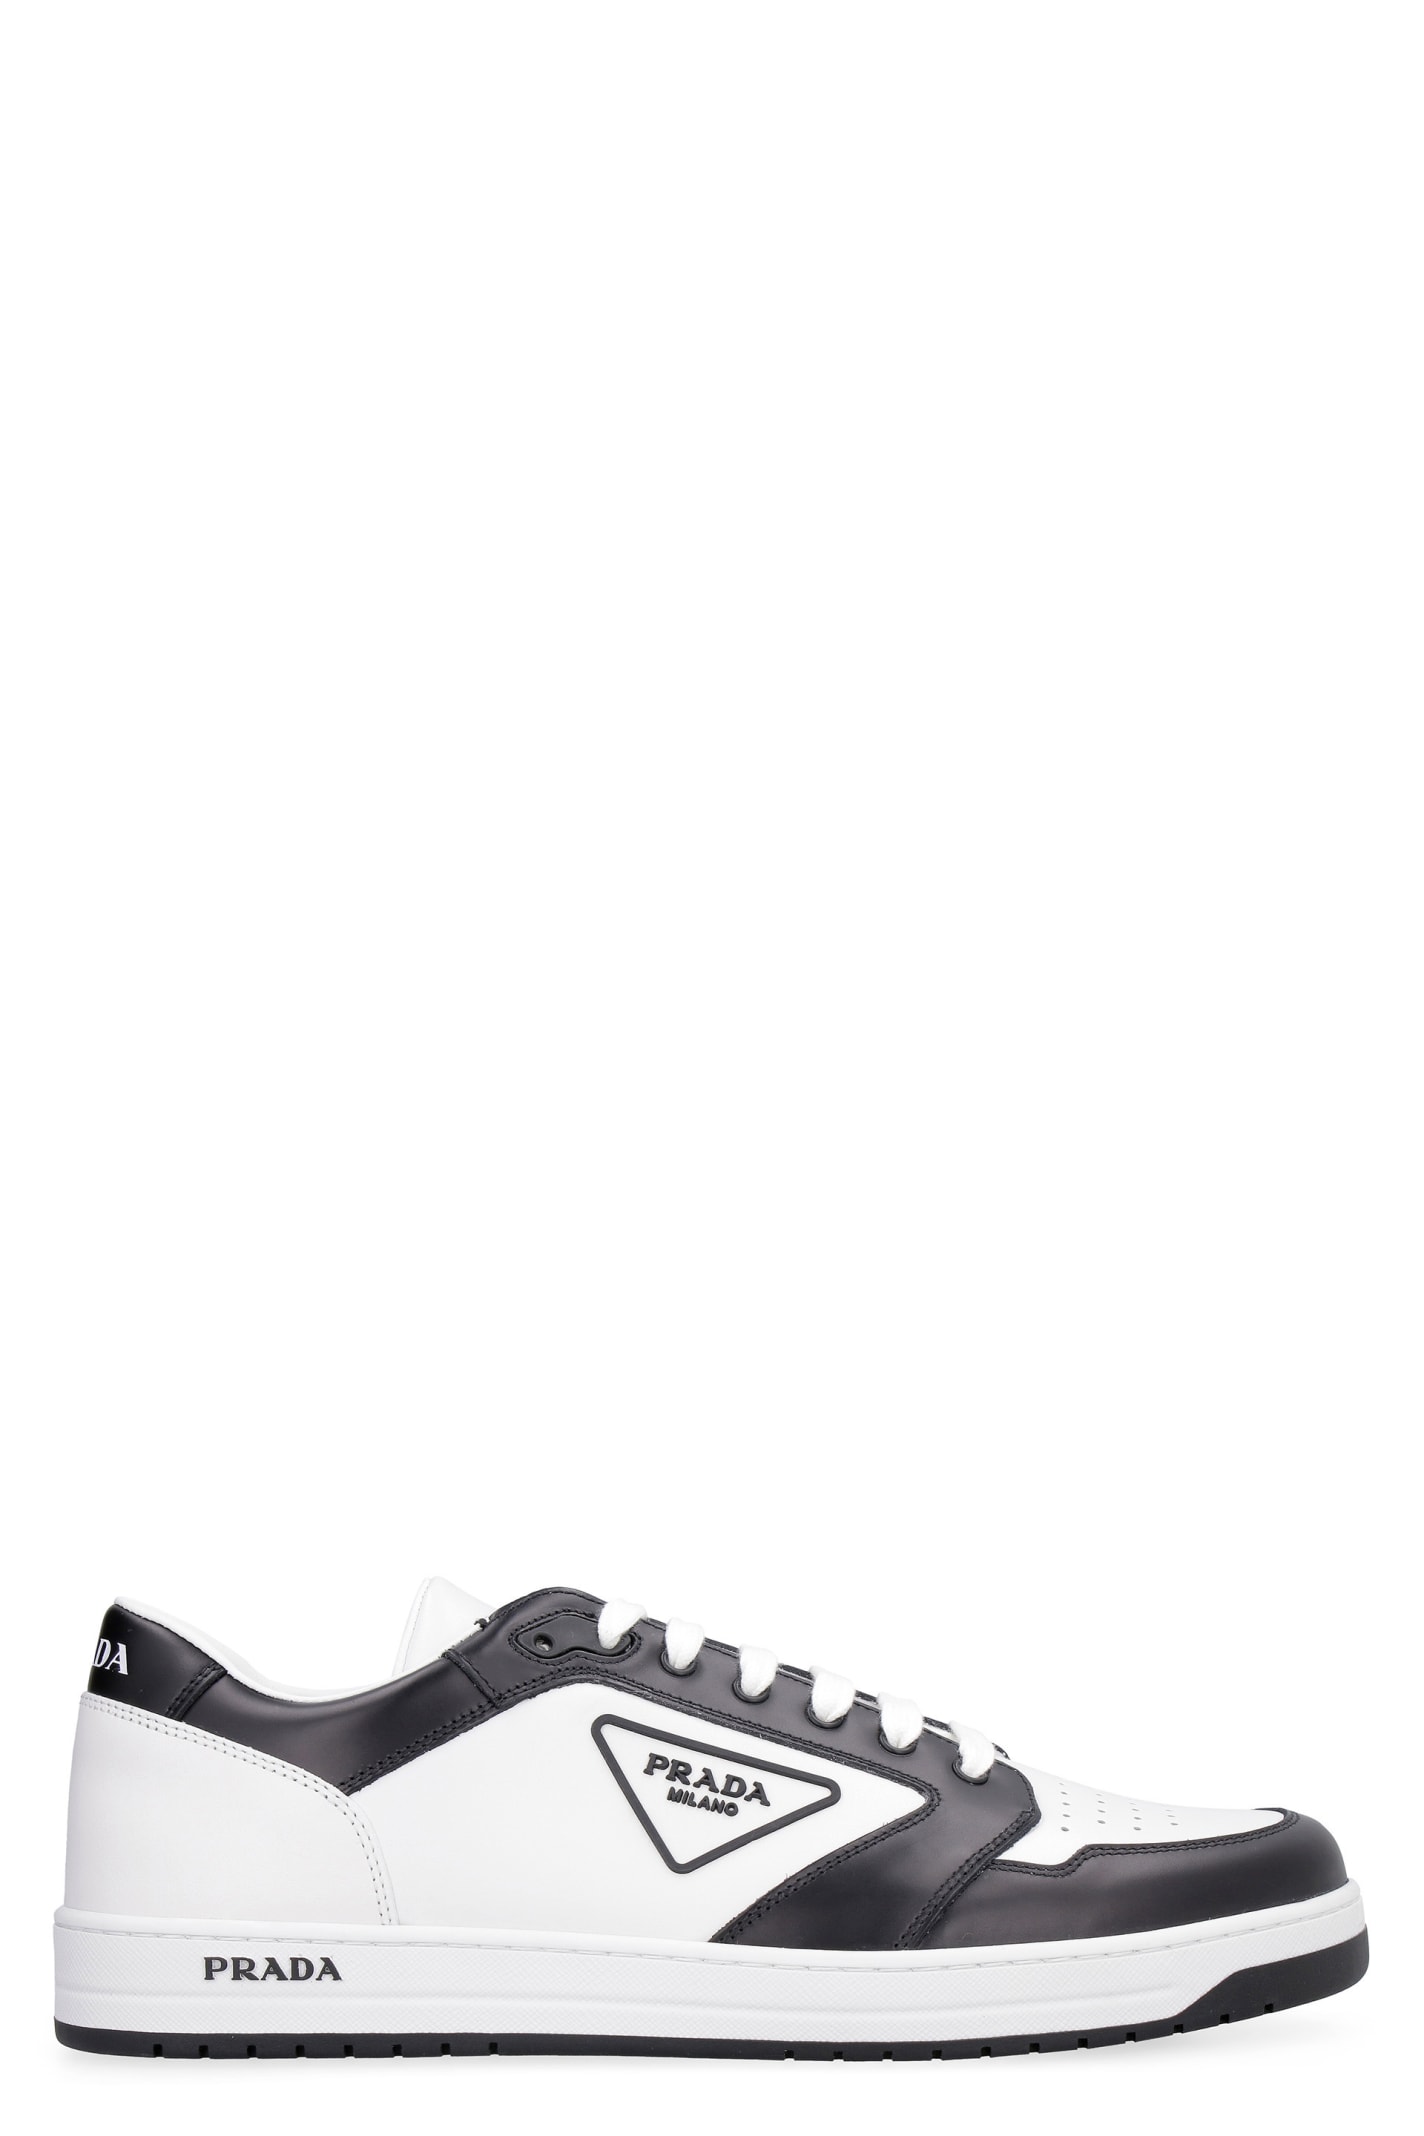 PRADA DISTRICT LEATHER LOW-TOP SNEAKERS